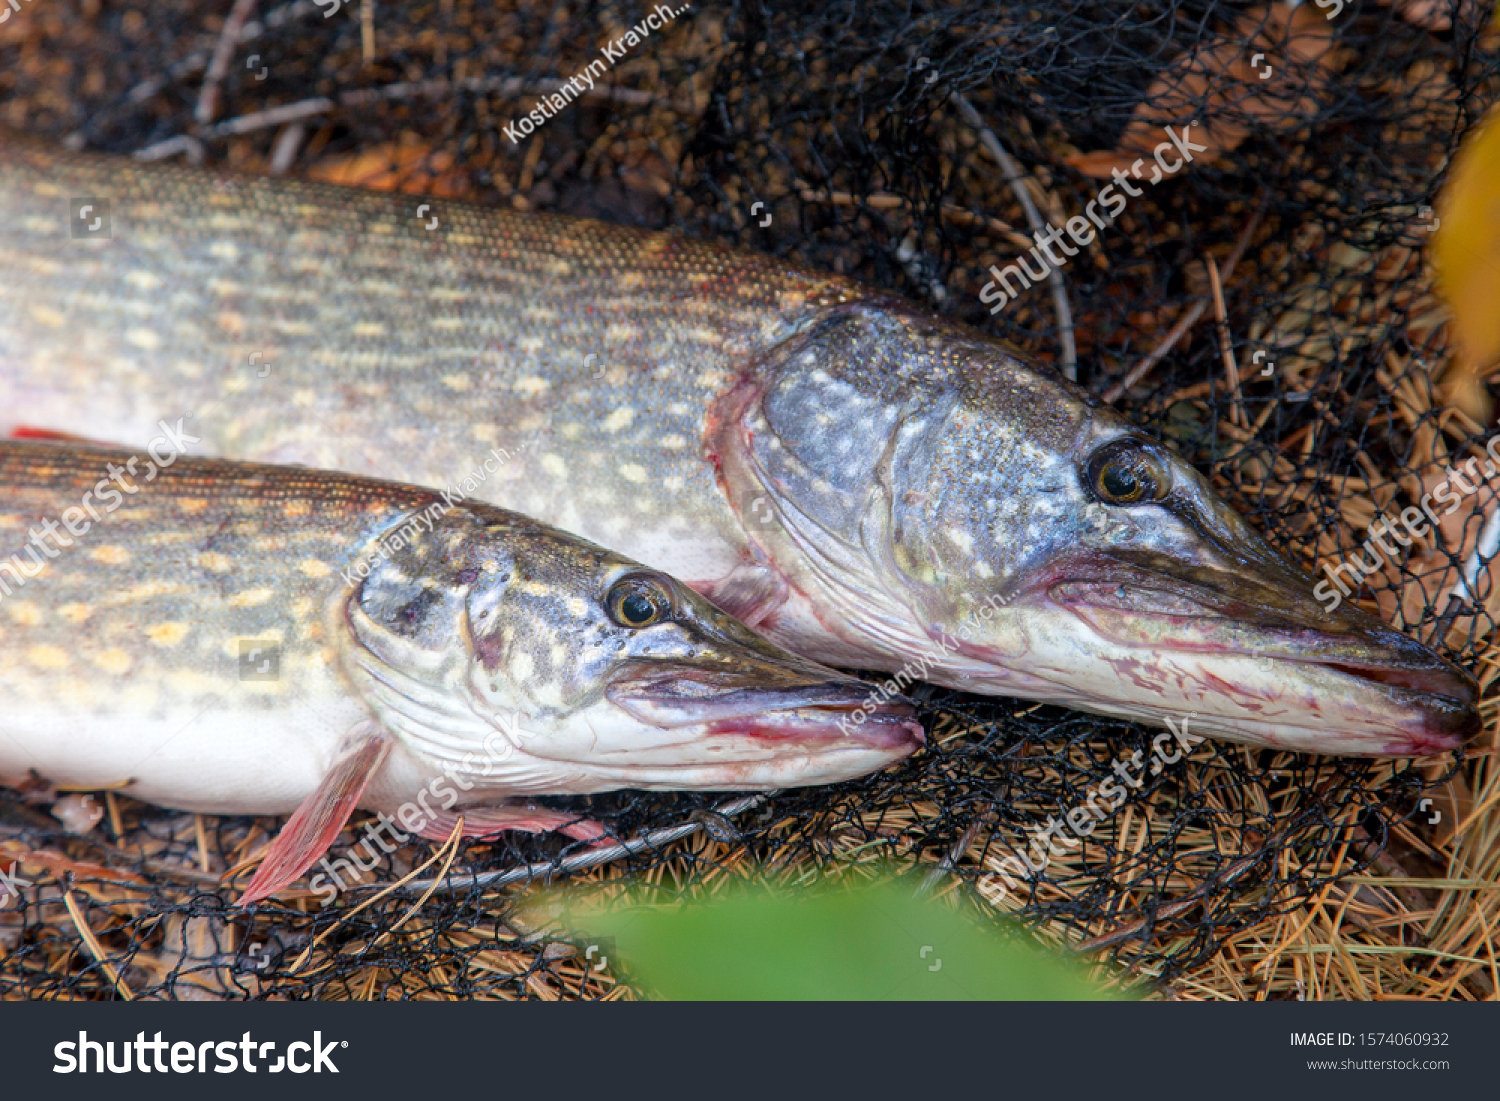 Fishing concept, trophy catch - two big freshwater pikes fish know as Esox Lucius just taken from the water on keep net. Freshwater Northern pikes fish know as Esox Lucius and fishing equipment #1574060932